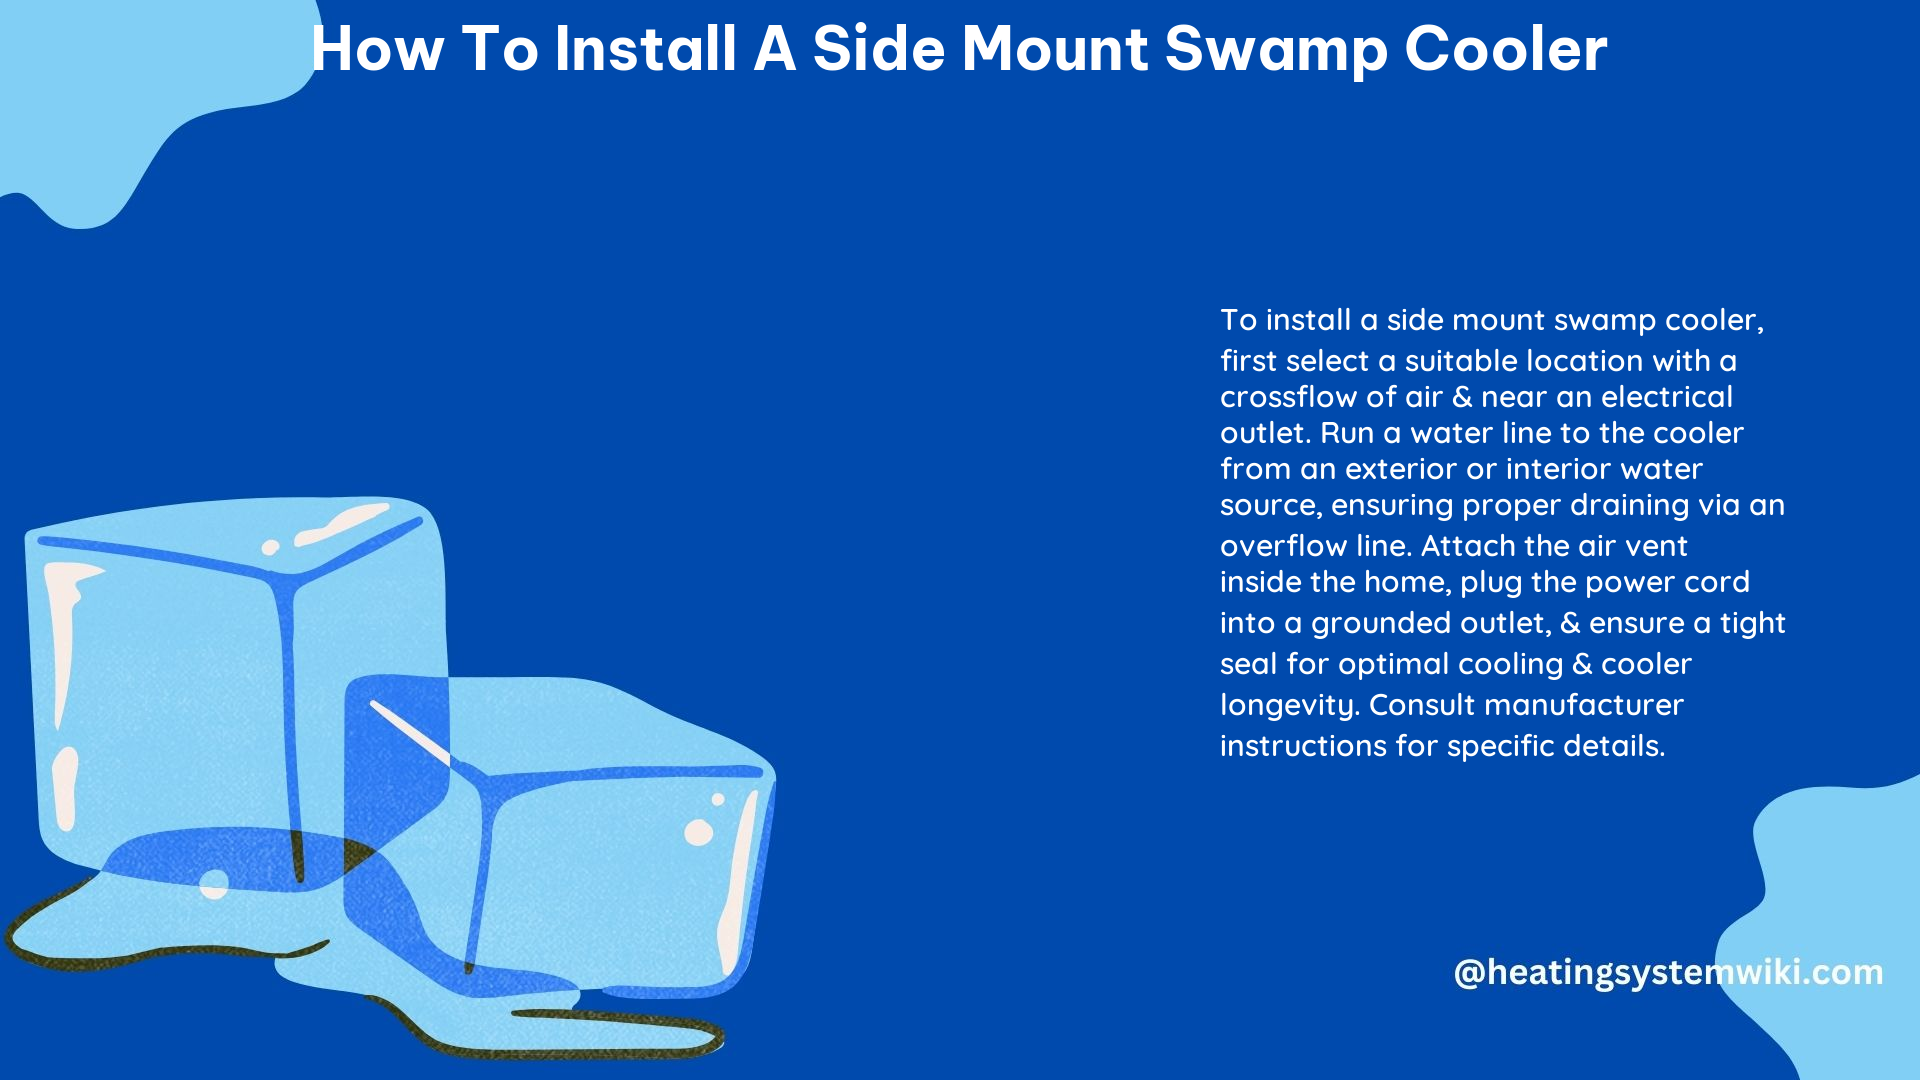 How to Install a Side Mount Swamp Cooler